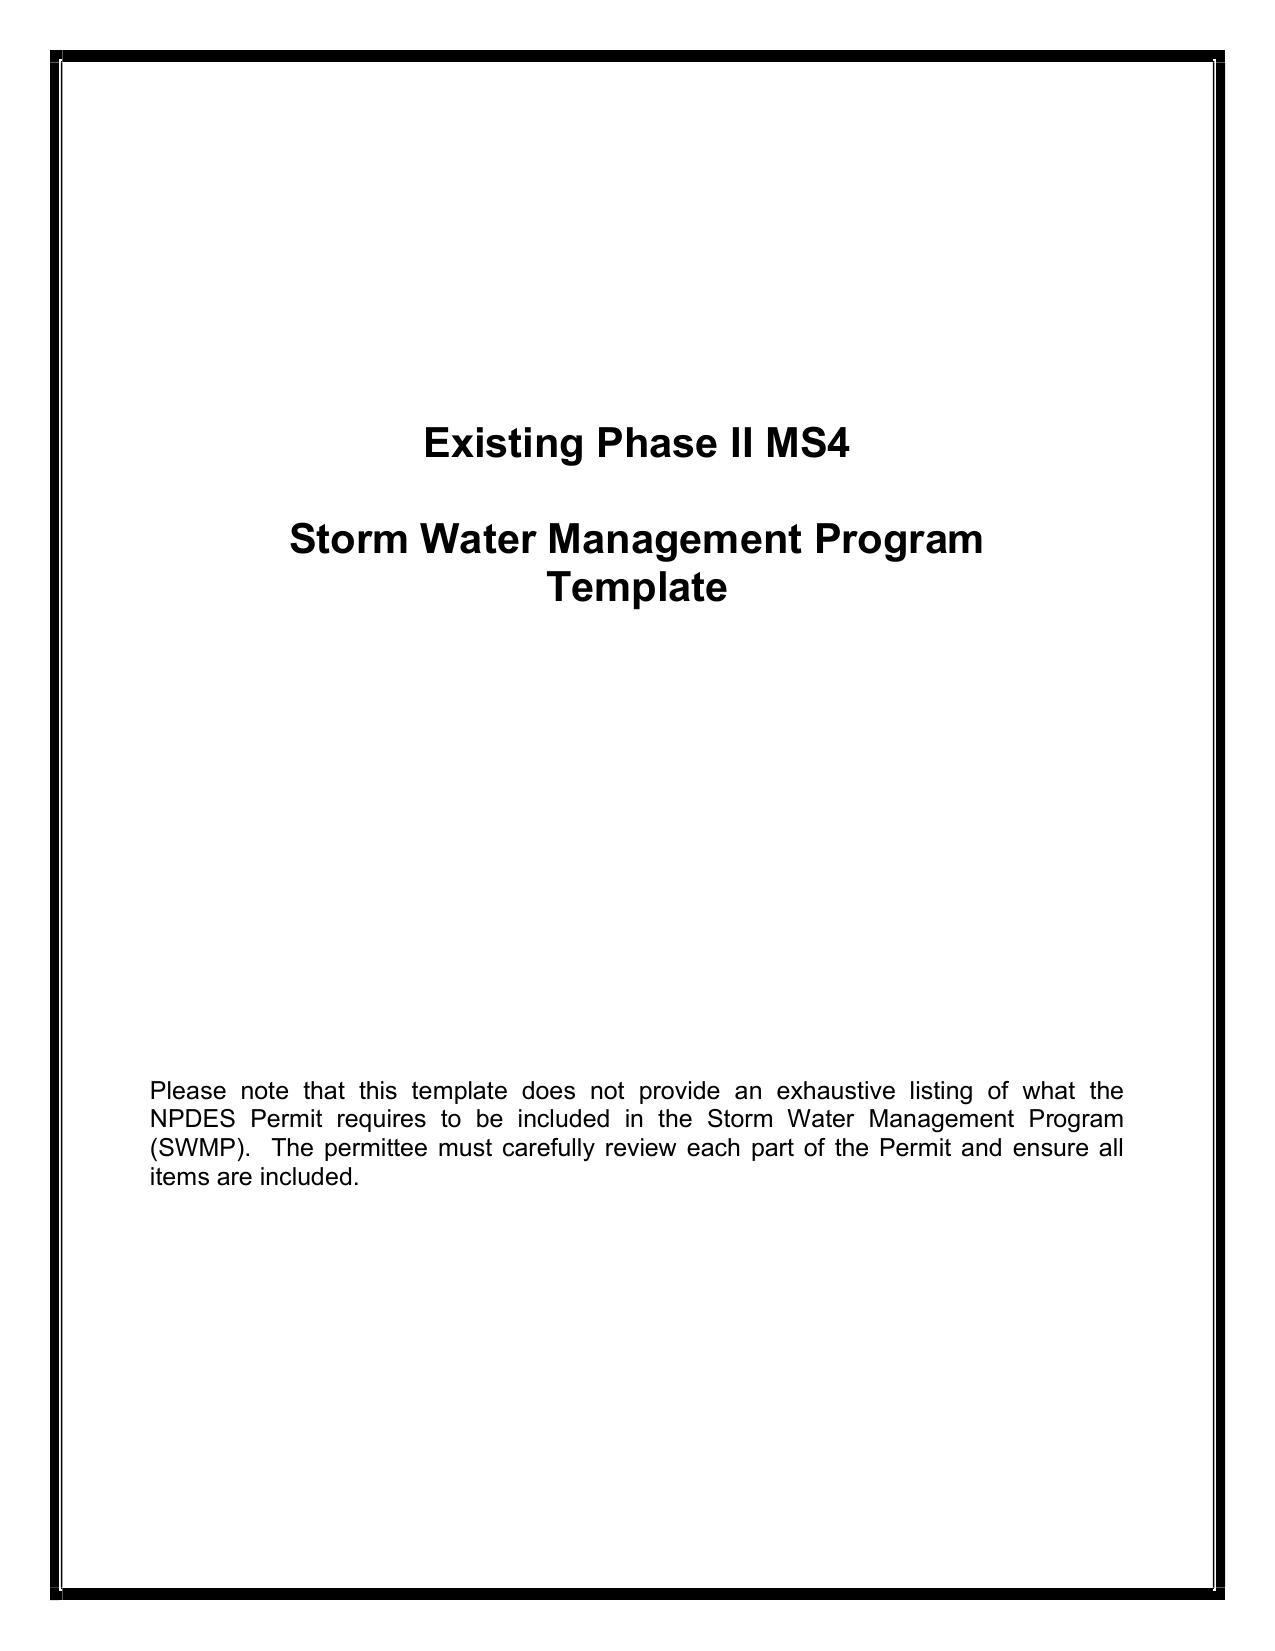 Existing Phase II MS4 Storm Water Management Program Template